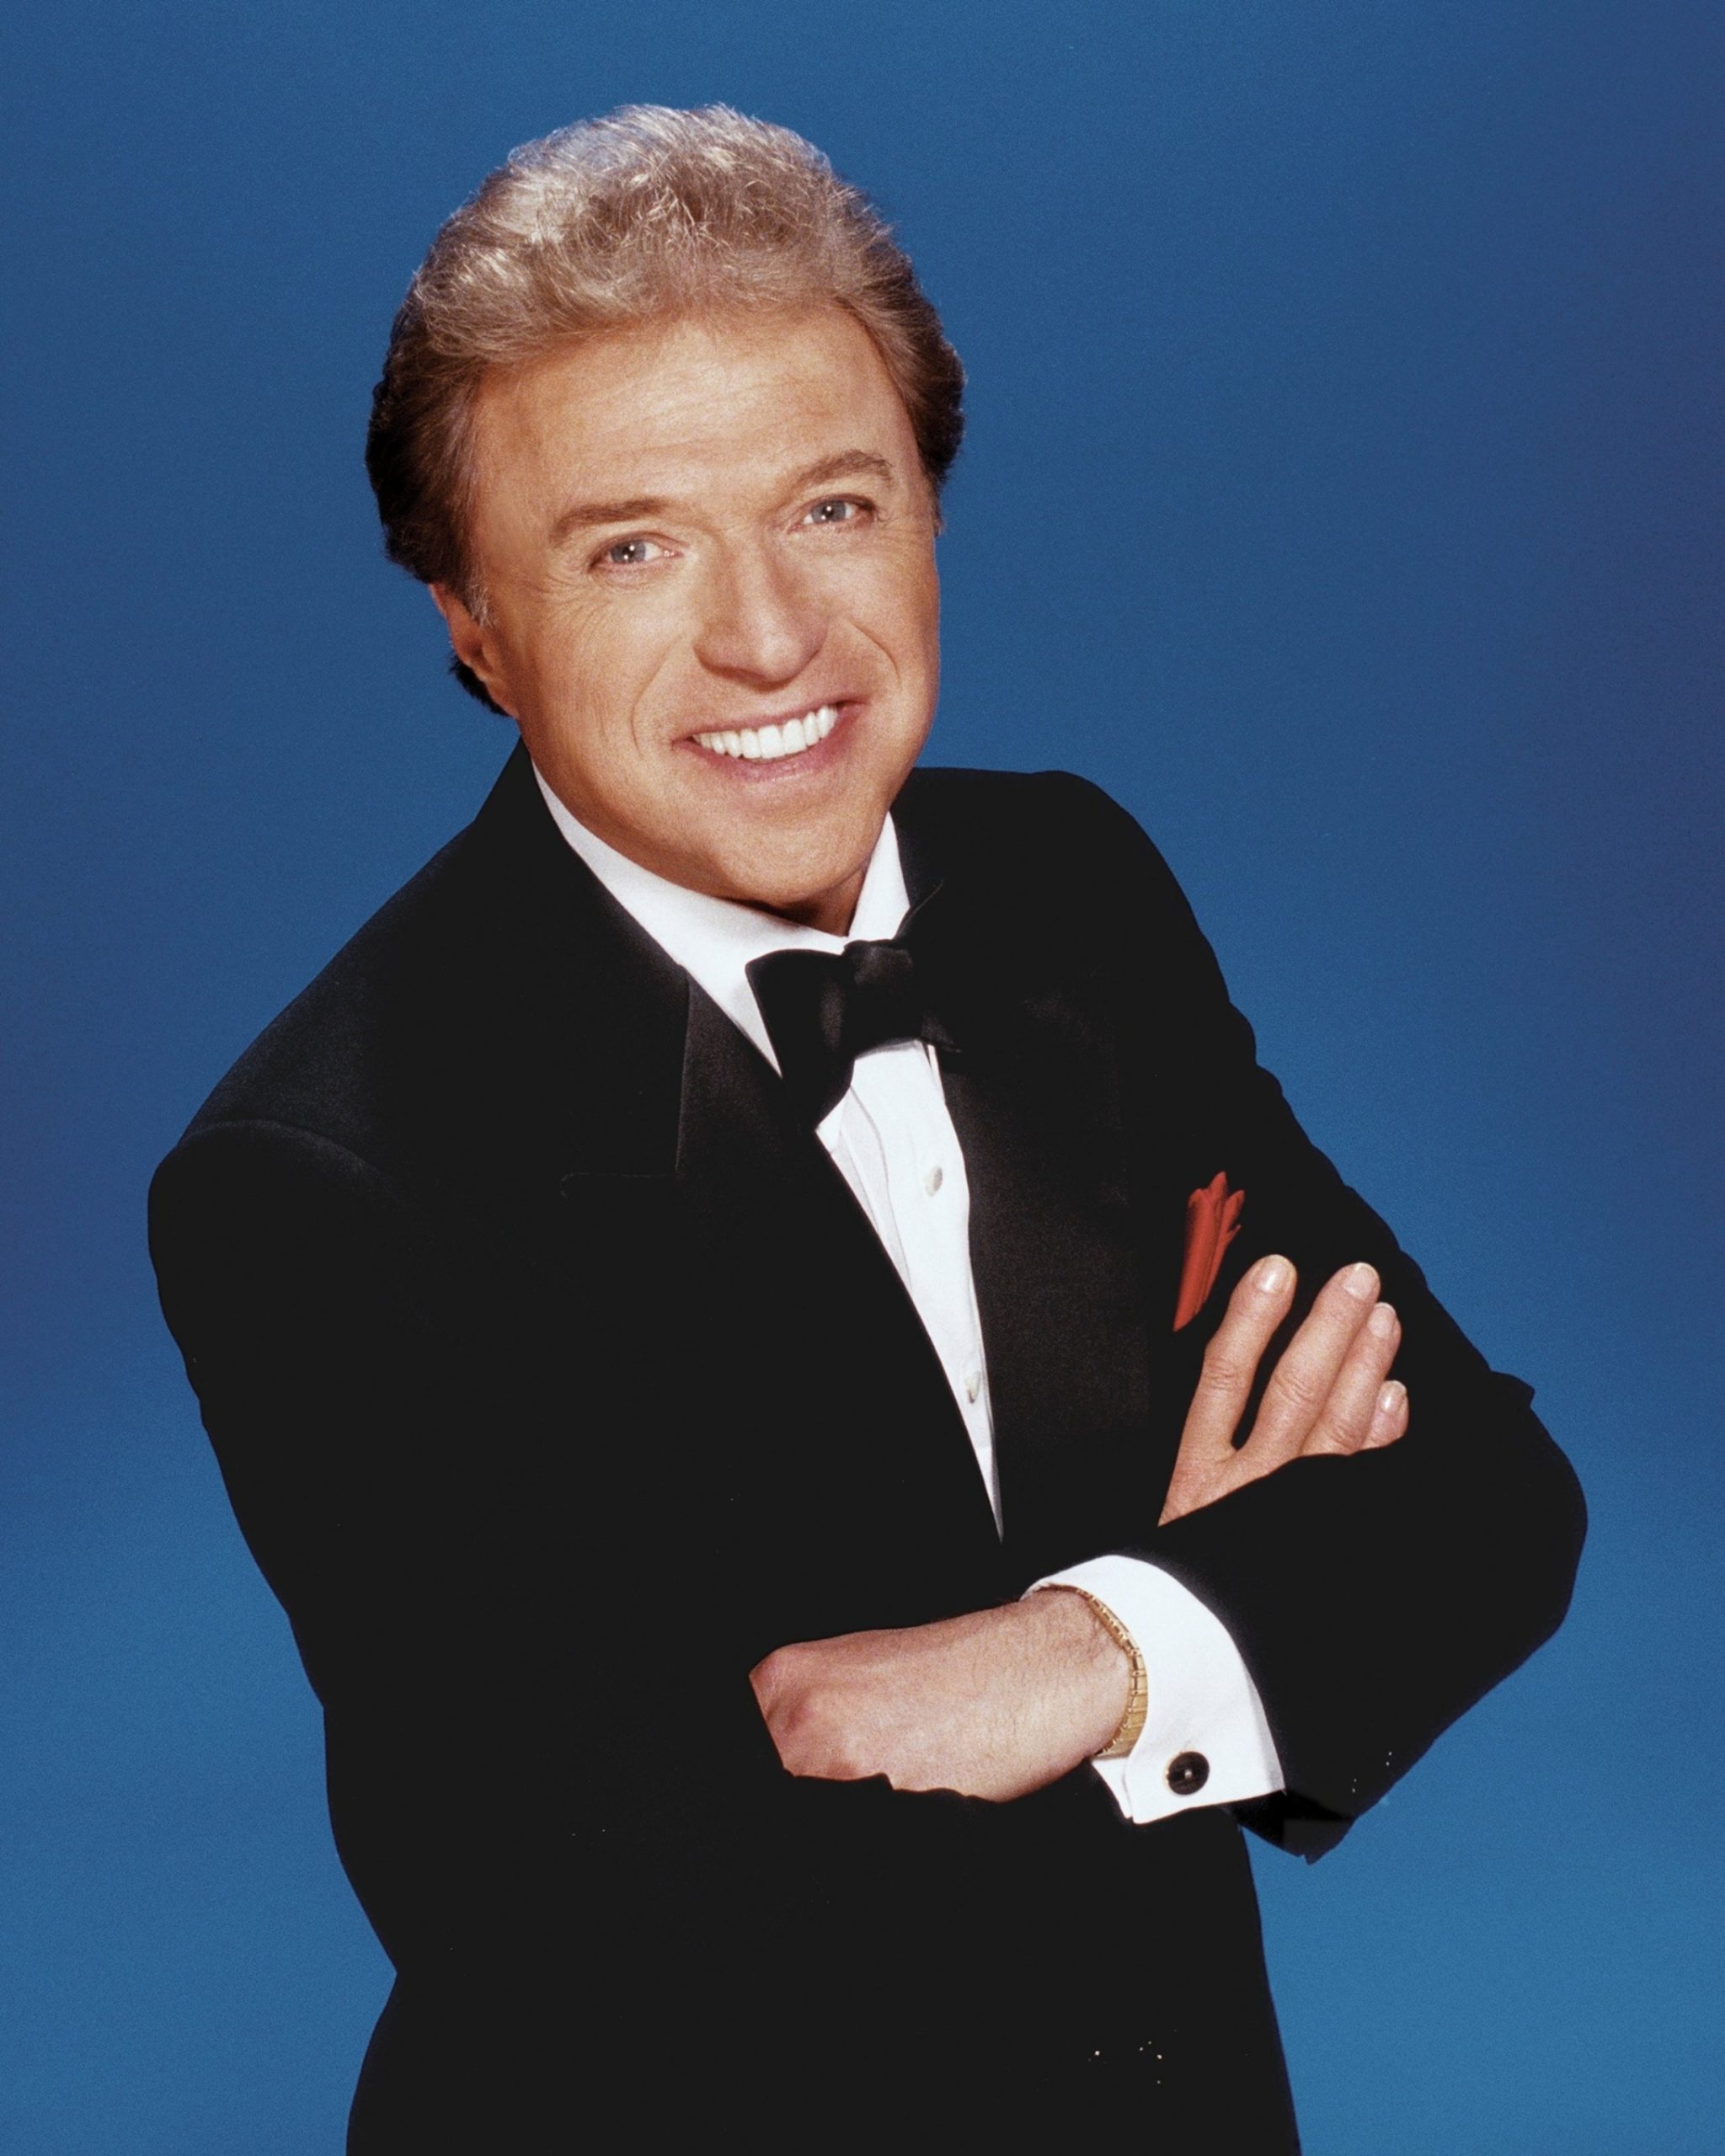 Steve Lawrence, one half of the singing duo with his wife Eydie Gorme, passes away at the age of 88